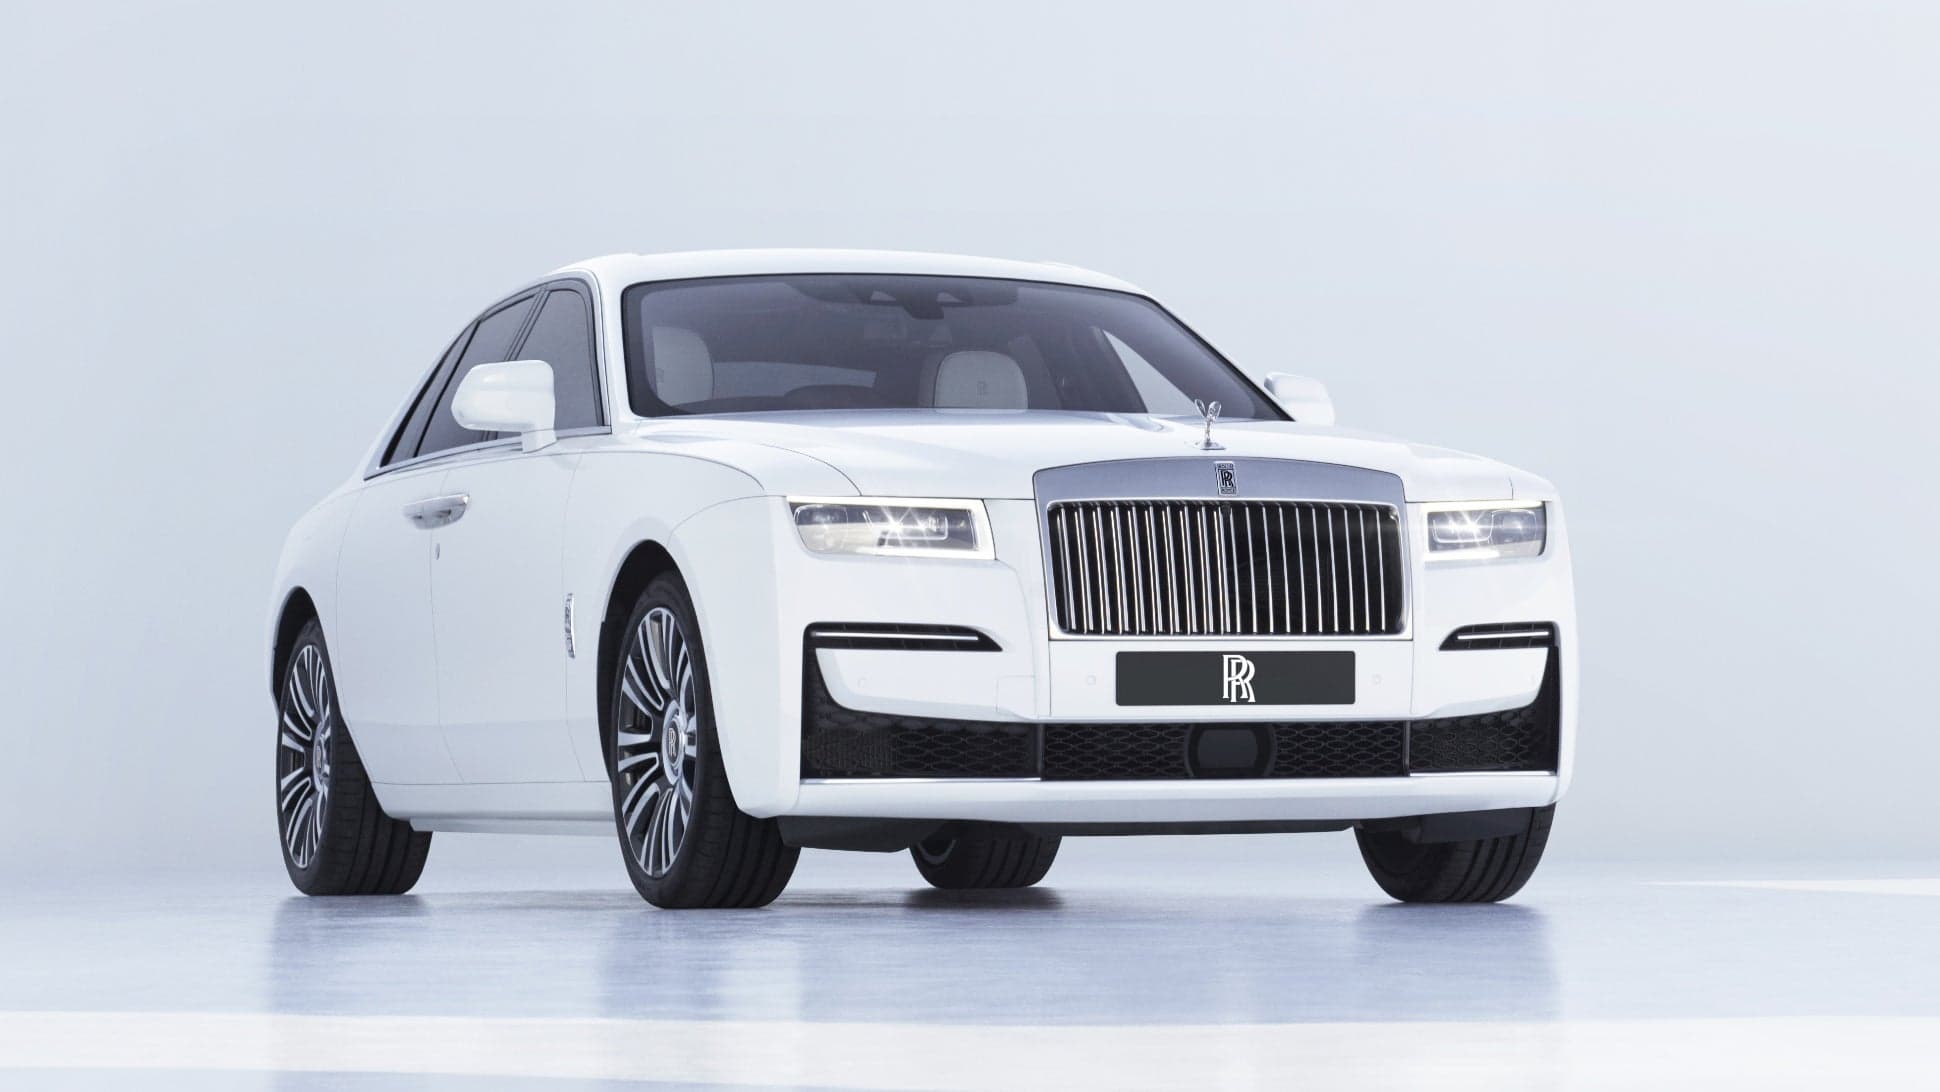 The 2021 Rolls-Royce Ghost Is a V12 Minimalist Luxury Dream That Isn’t Just for Being Chauffeured